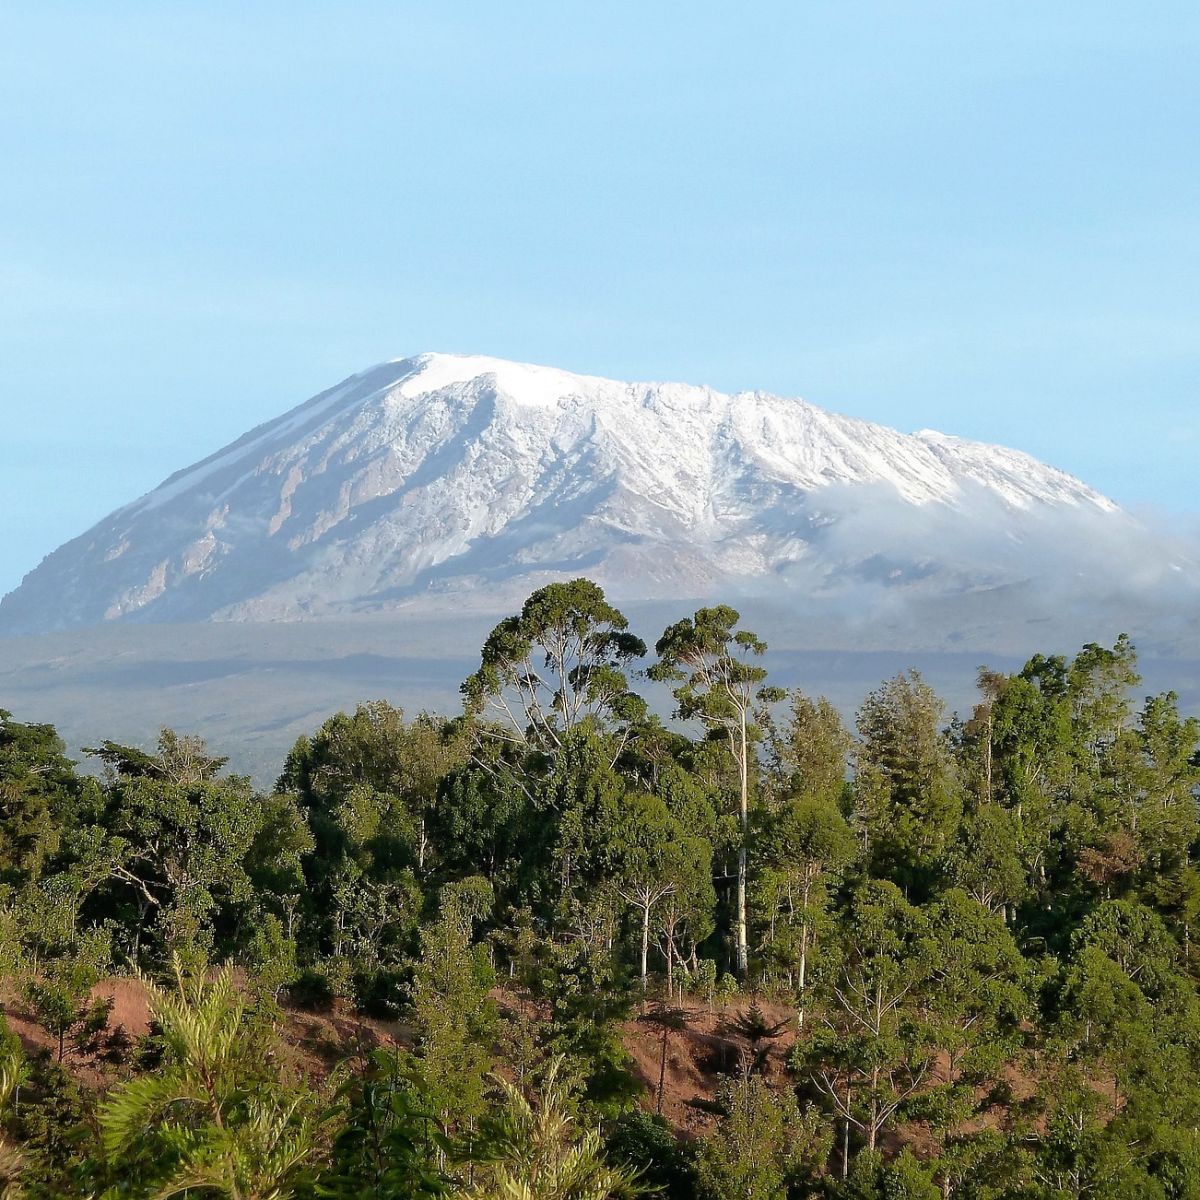 Kilimanjaro from a distance